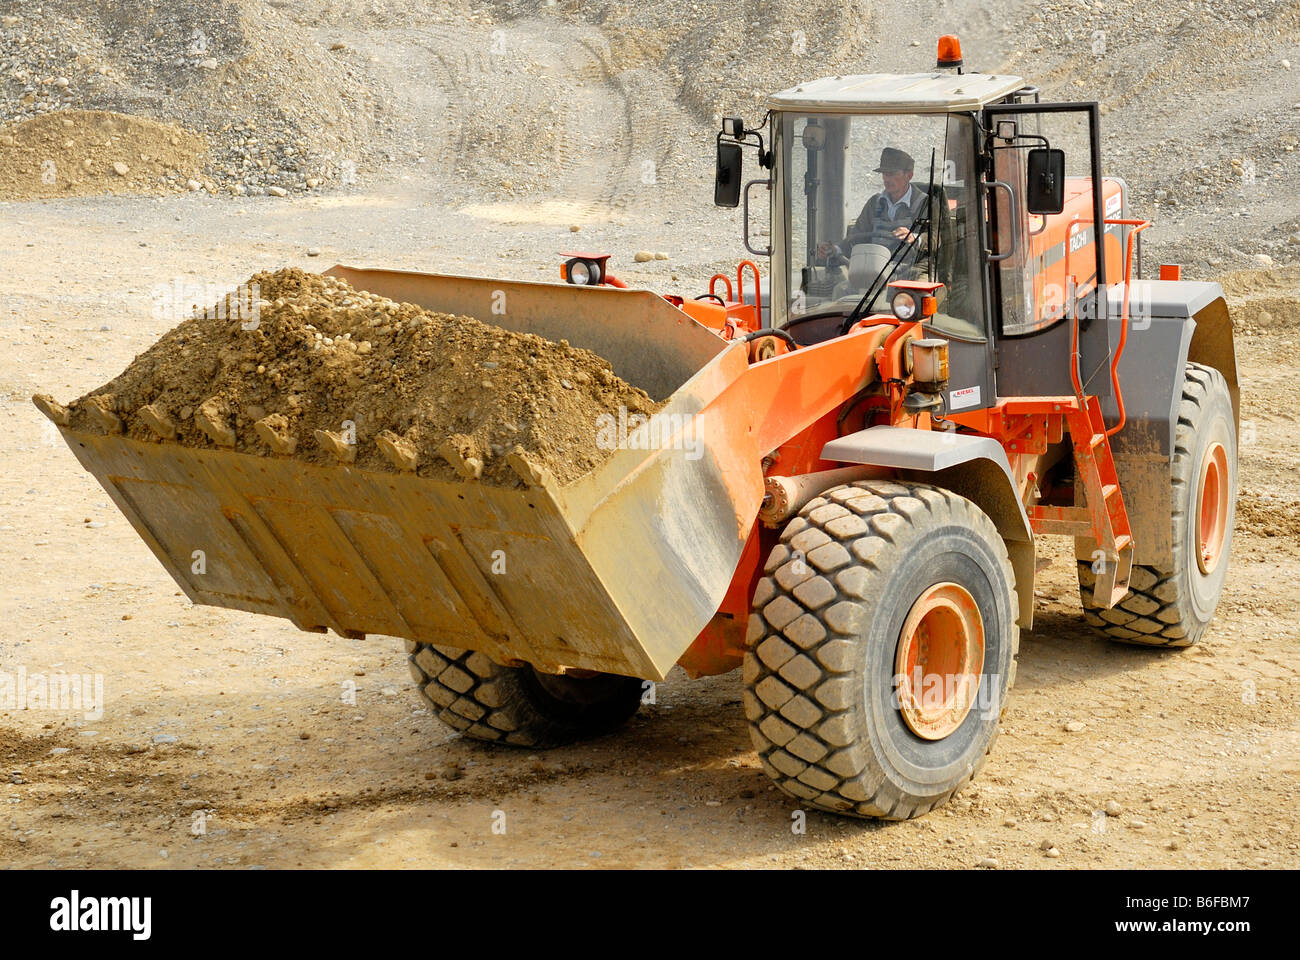 Hitachi LX 290E wheeled loader carrying gravel in a gravel pit Stock Photo